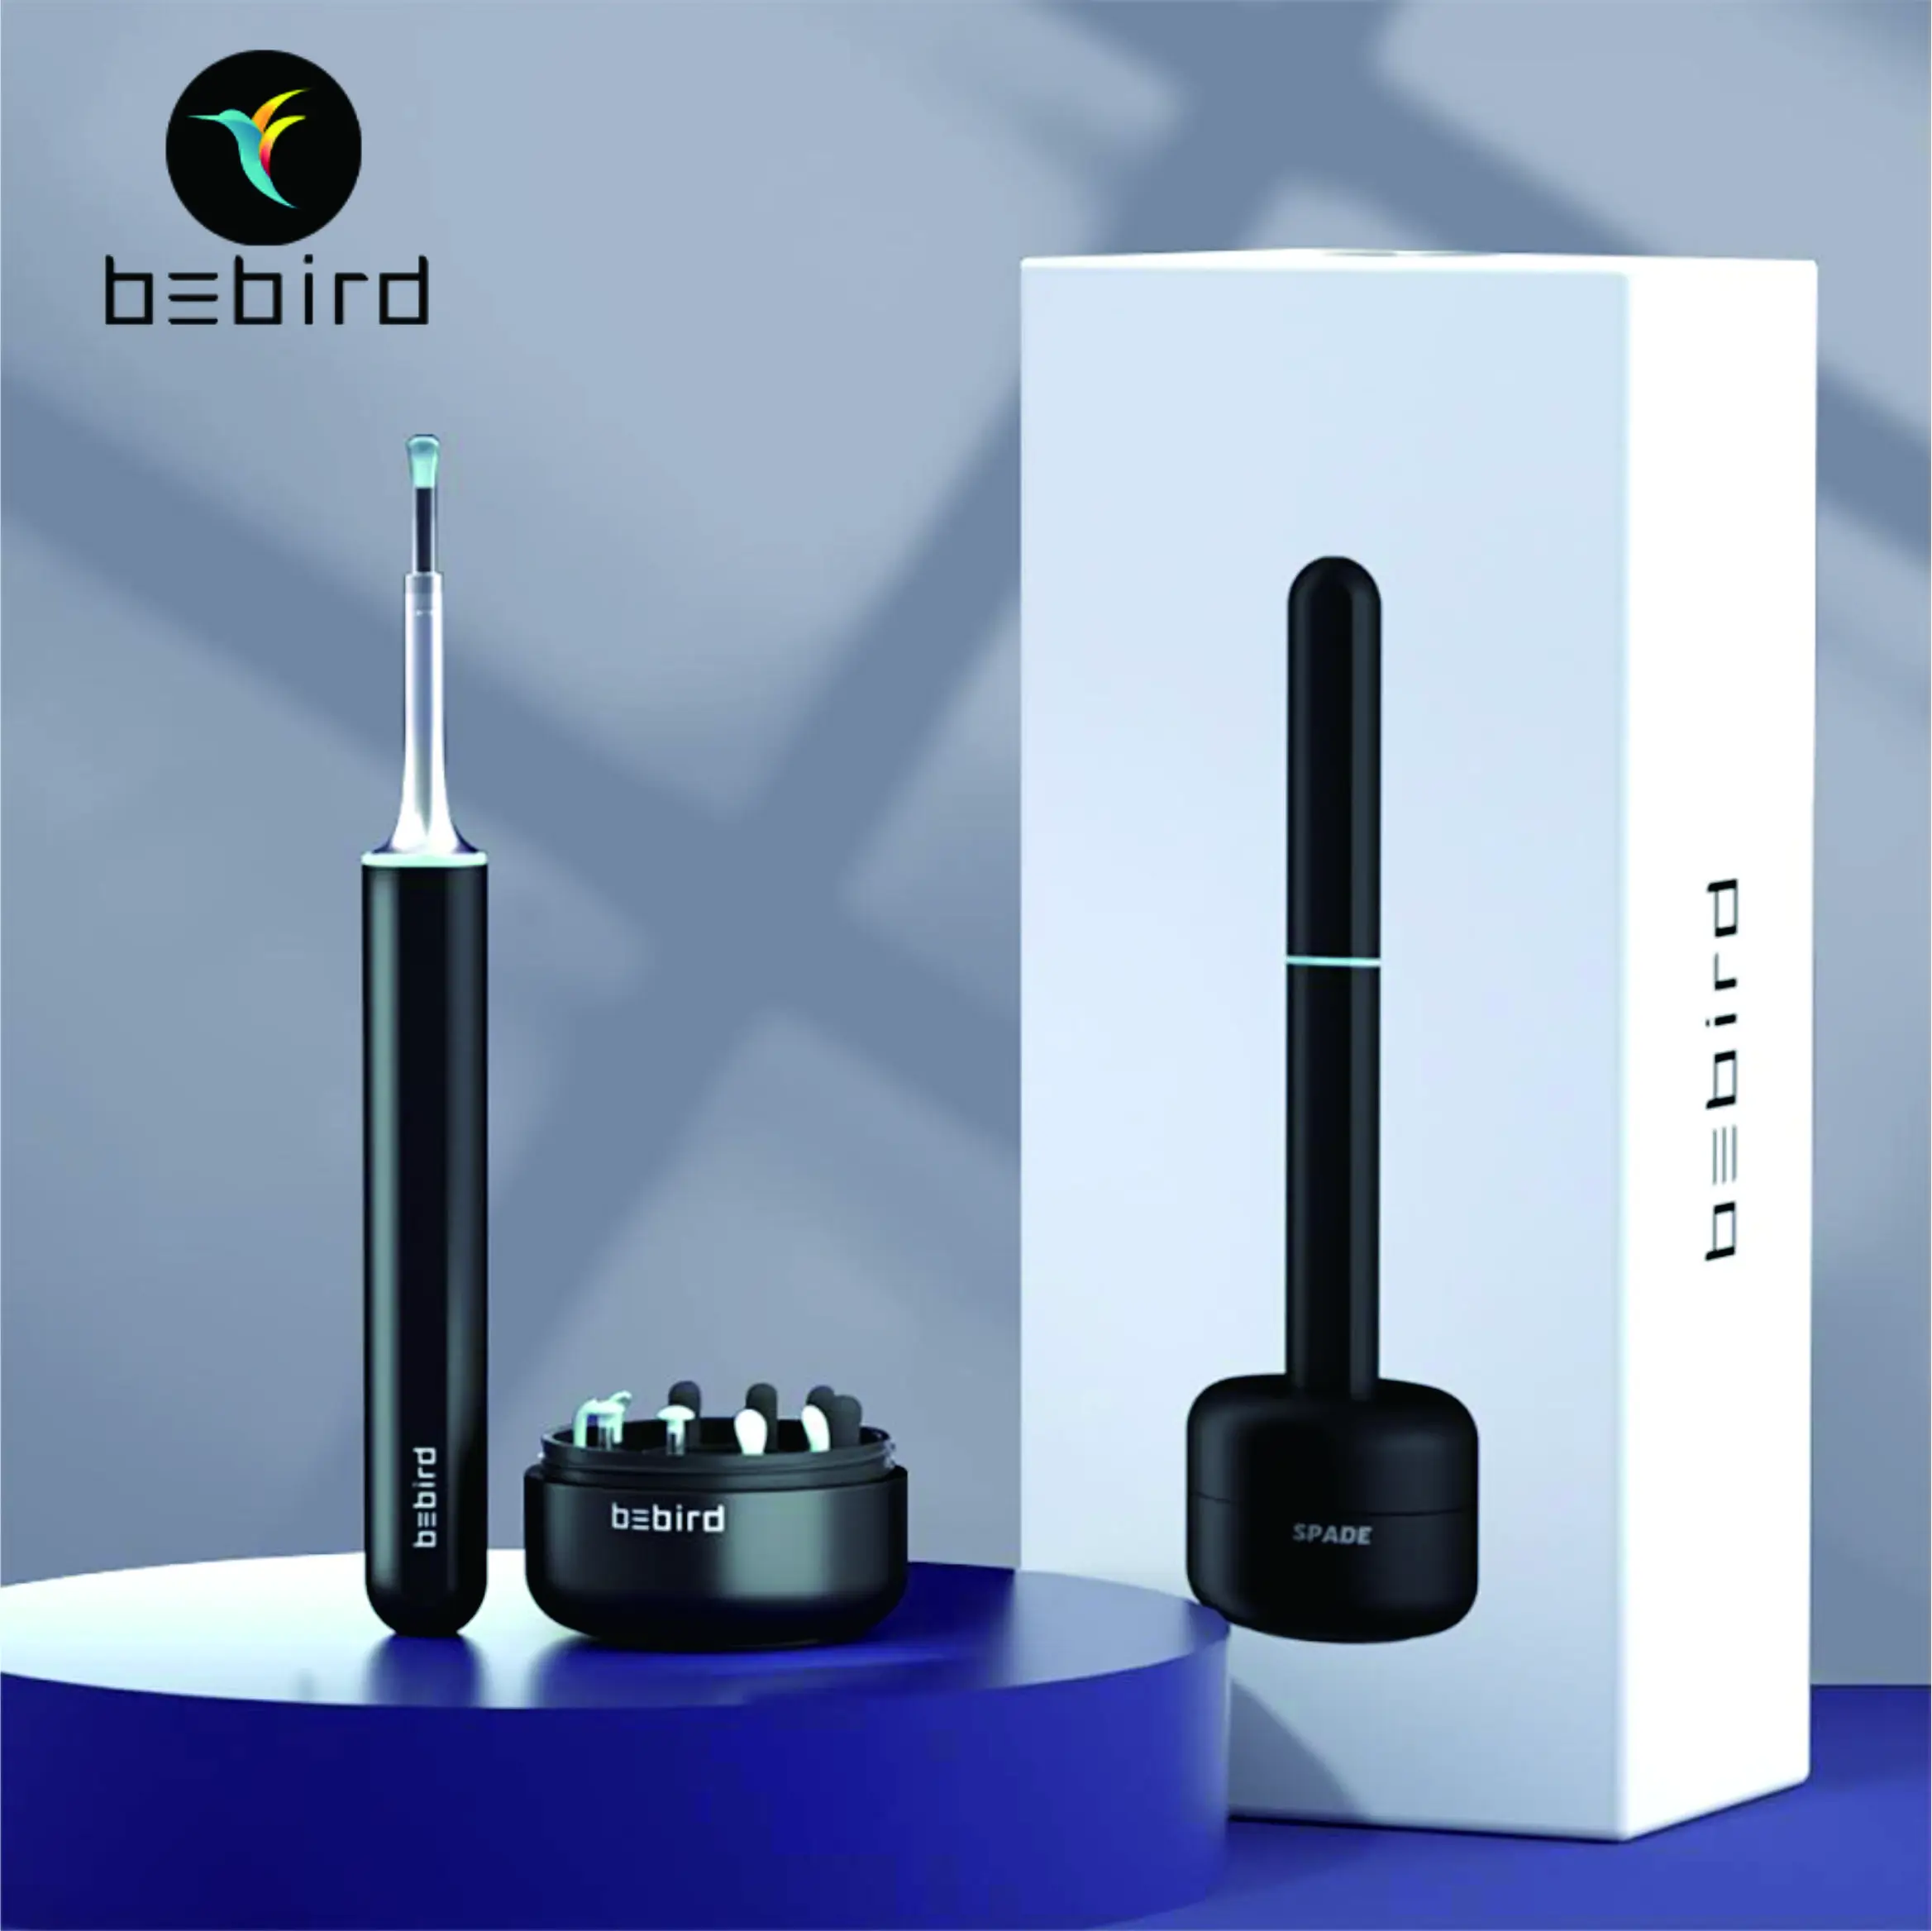 Bebird X17 Pro Clip Visual Ear Cleaner With Magnetically Charged Base,Ear Wax Removal Tool Otoscope Camera App On iPhone Andorid